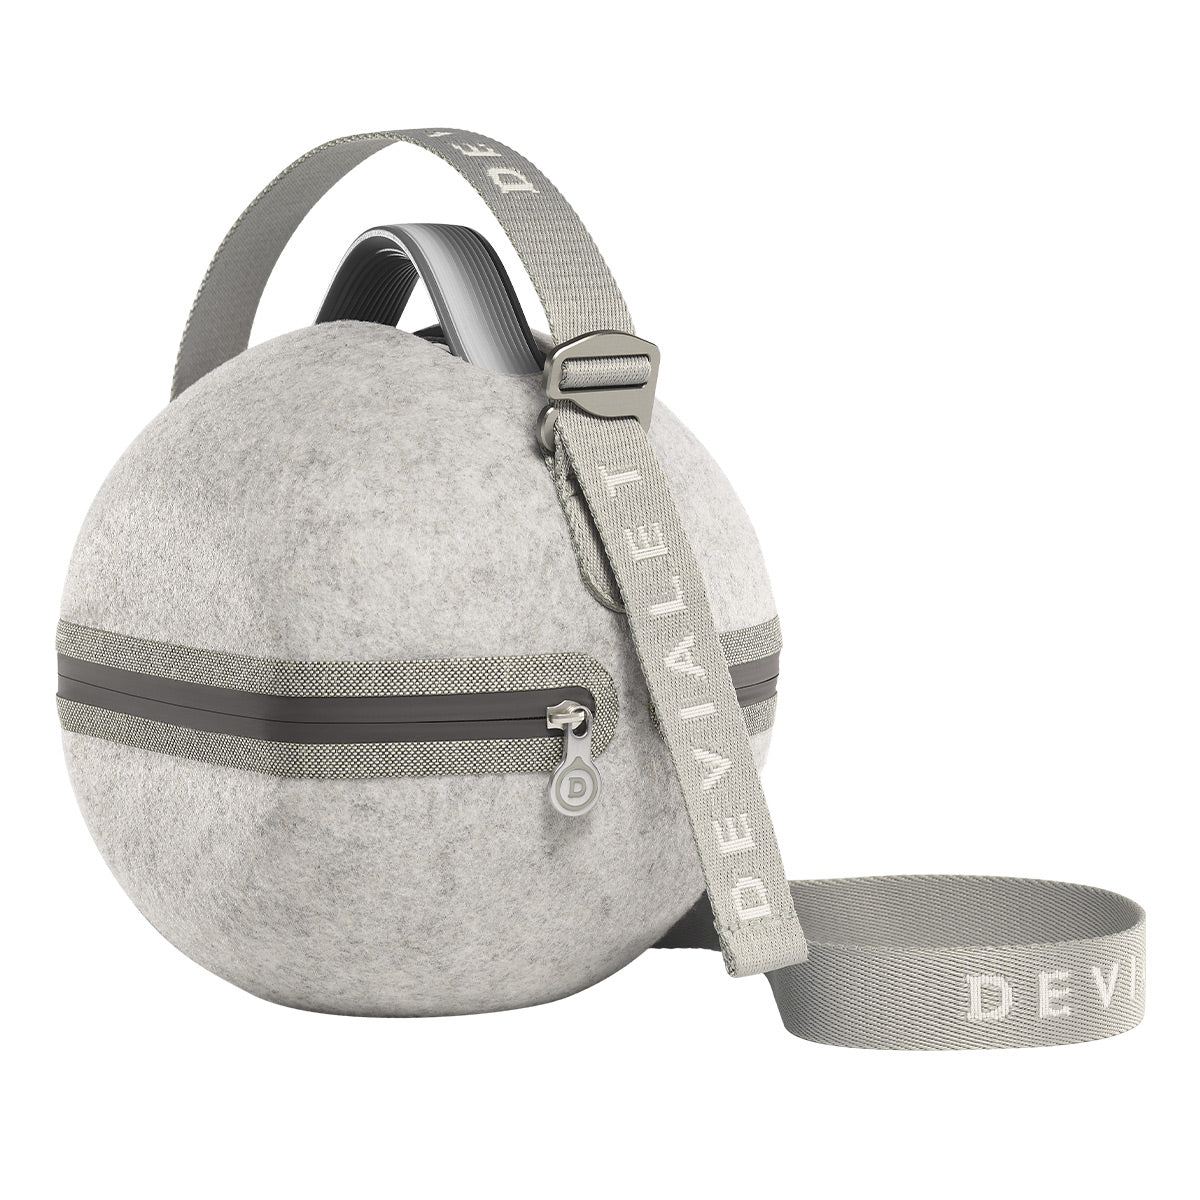 Devialet Mania Portable Bluetooth Smart Speaker (Sandstorm) with Charging Station and Cocoon Felt Carrying Case